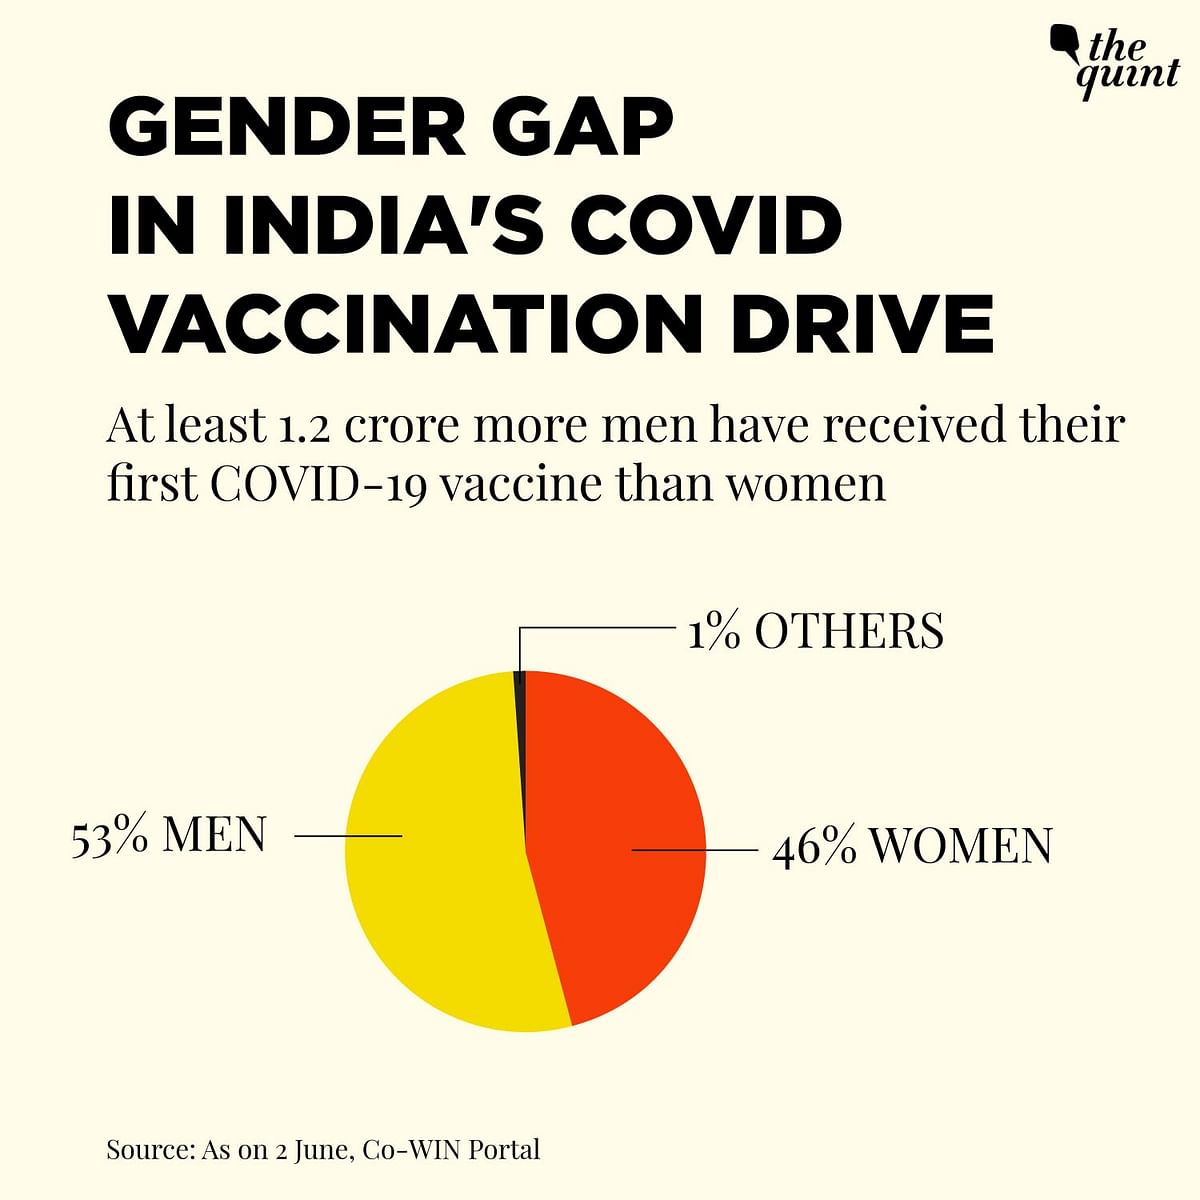 Misinformation, vaccine hesitancy, lack of access – what’s behind the differential vaccine trends for men and women?